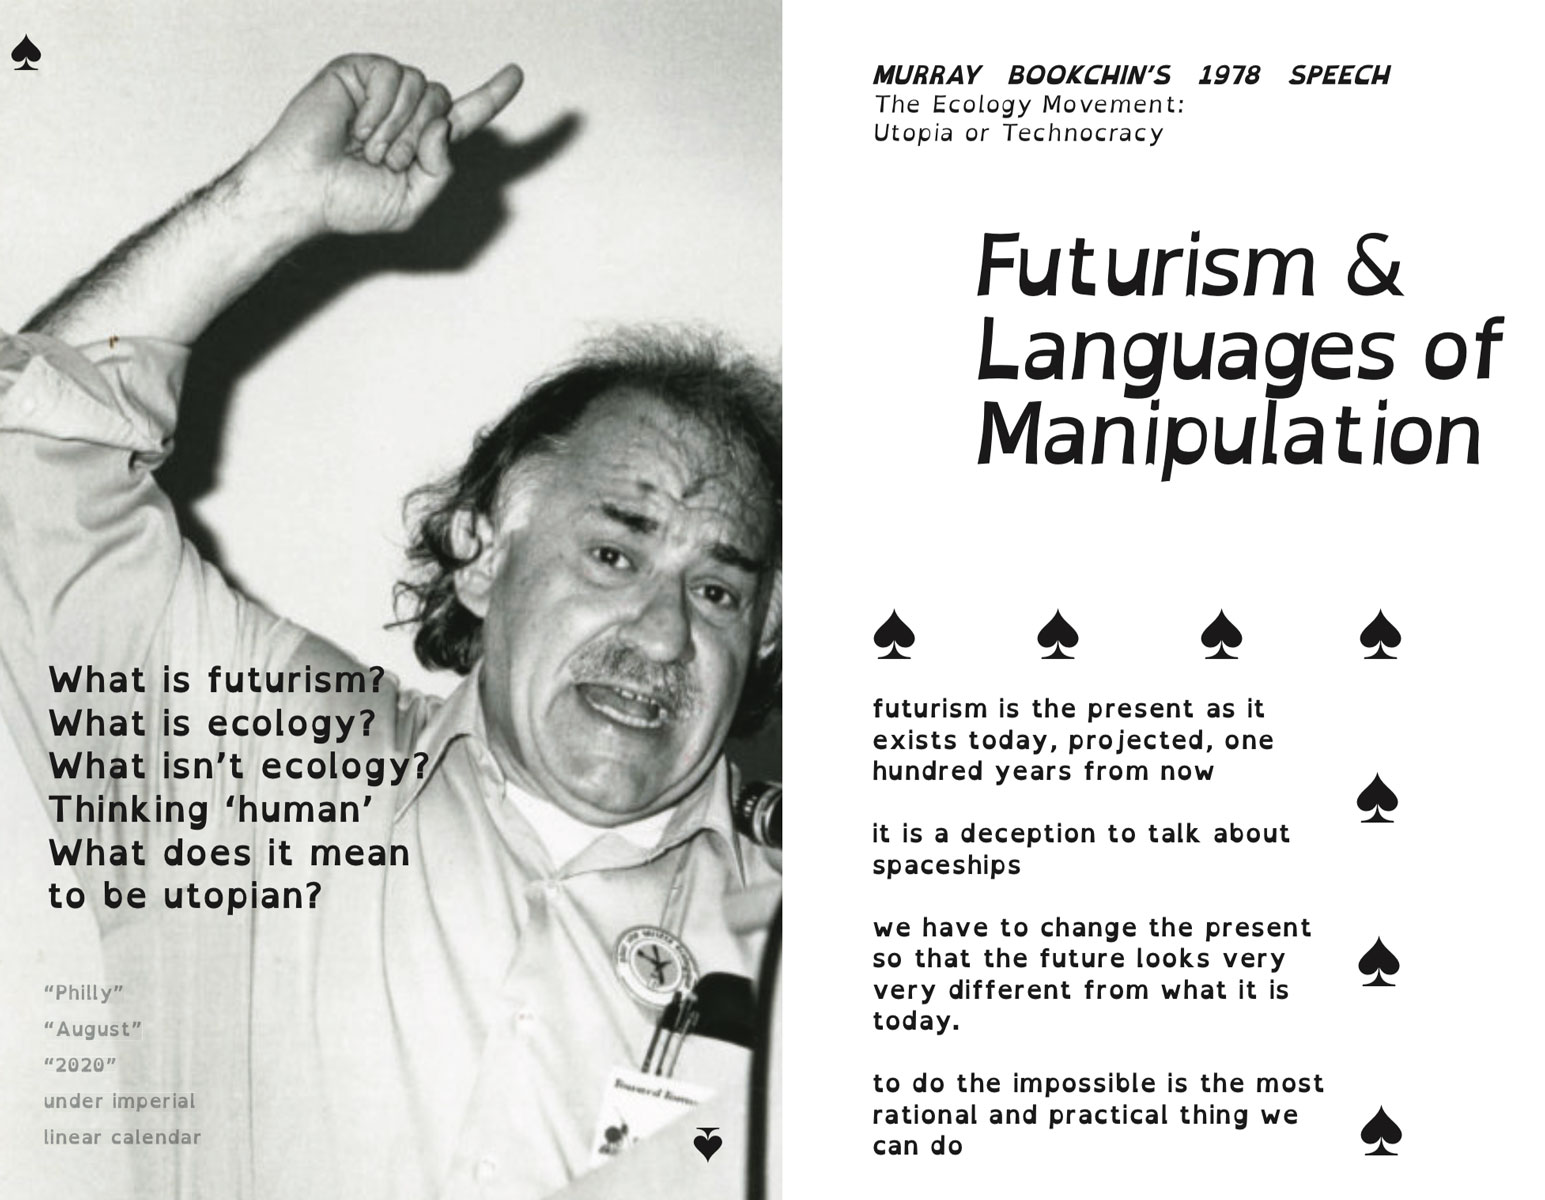 A screencapture of the front and back cover of the Bookchin zine